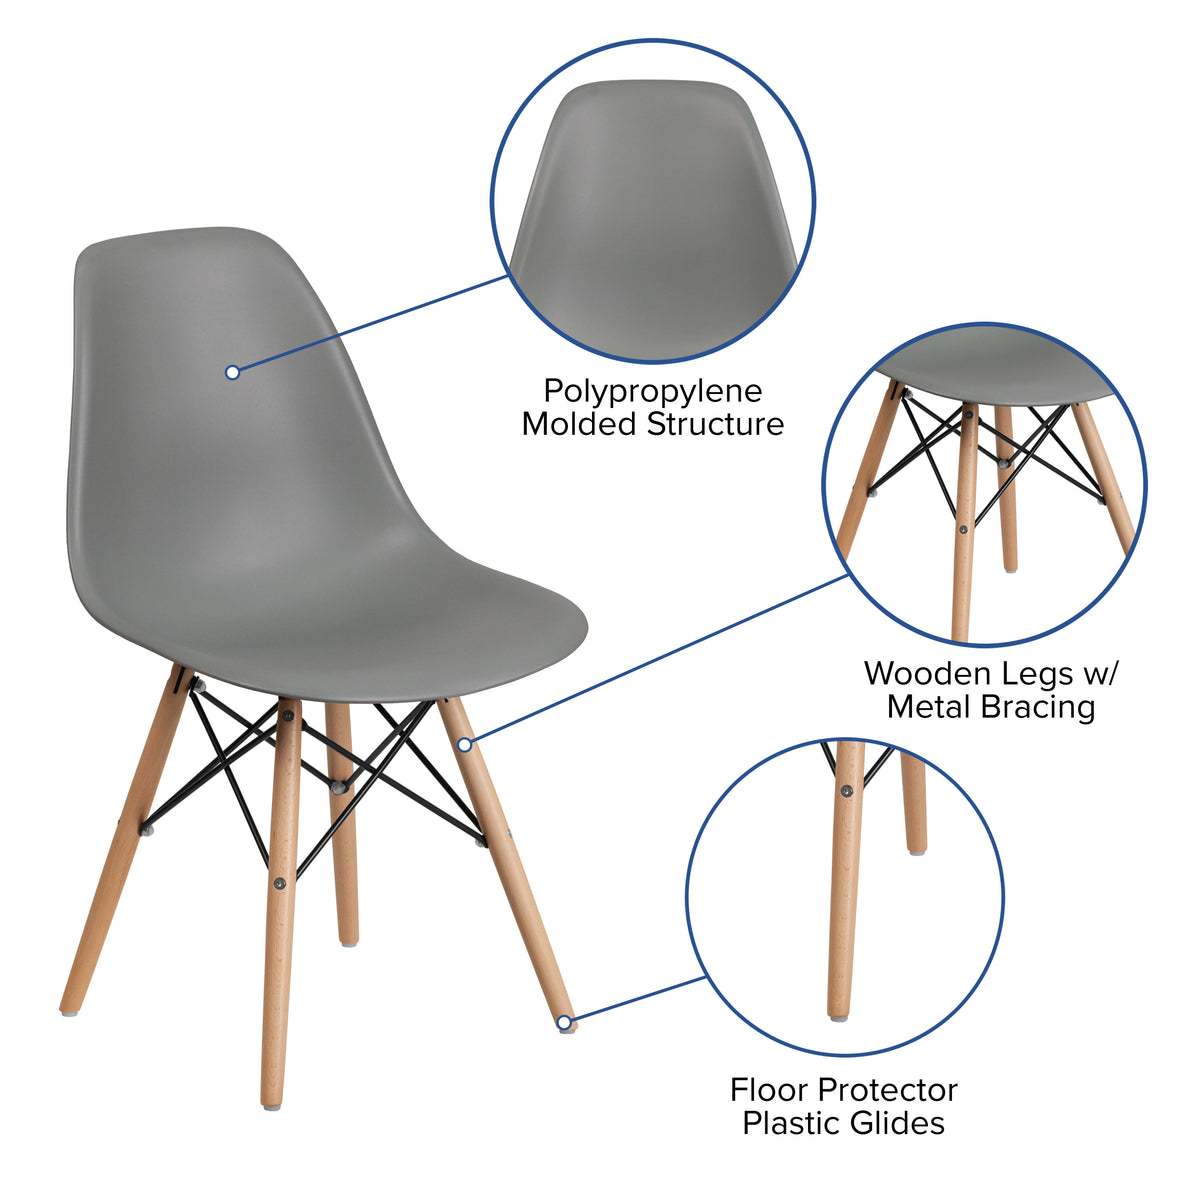 Moss Gray |#| Moss Gray Plastic Chair with Wooden Legs - Hospitality Seating - Side Chair